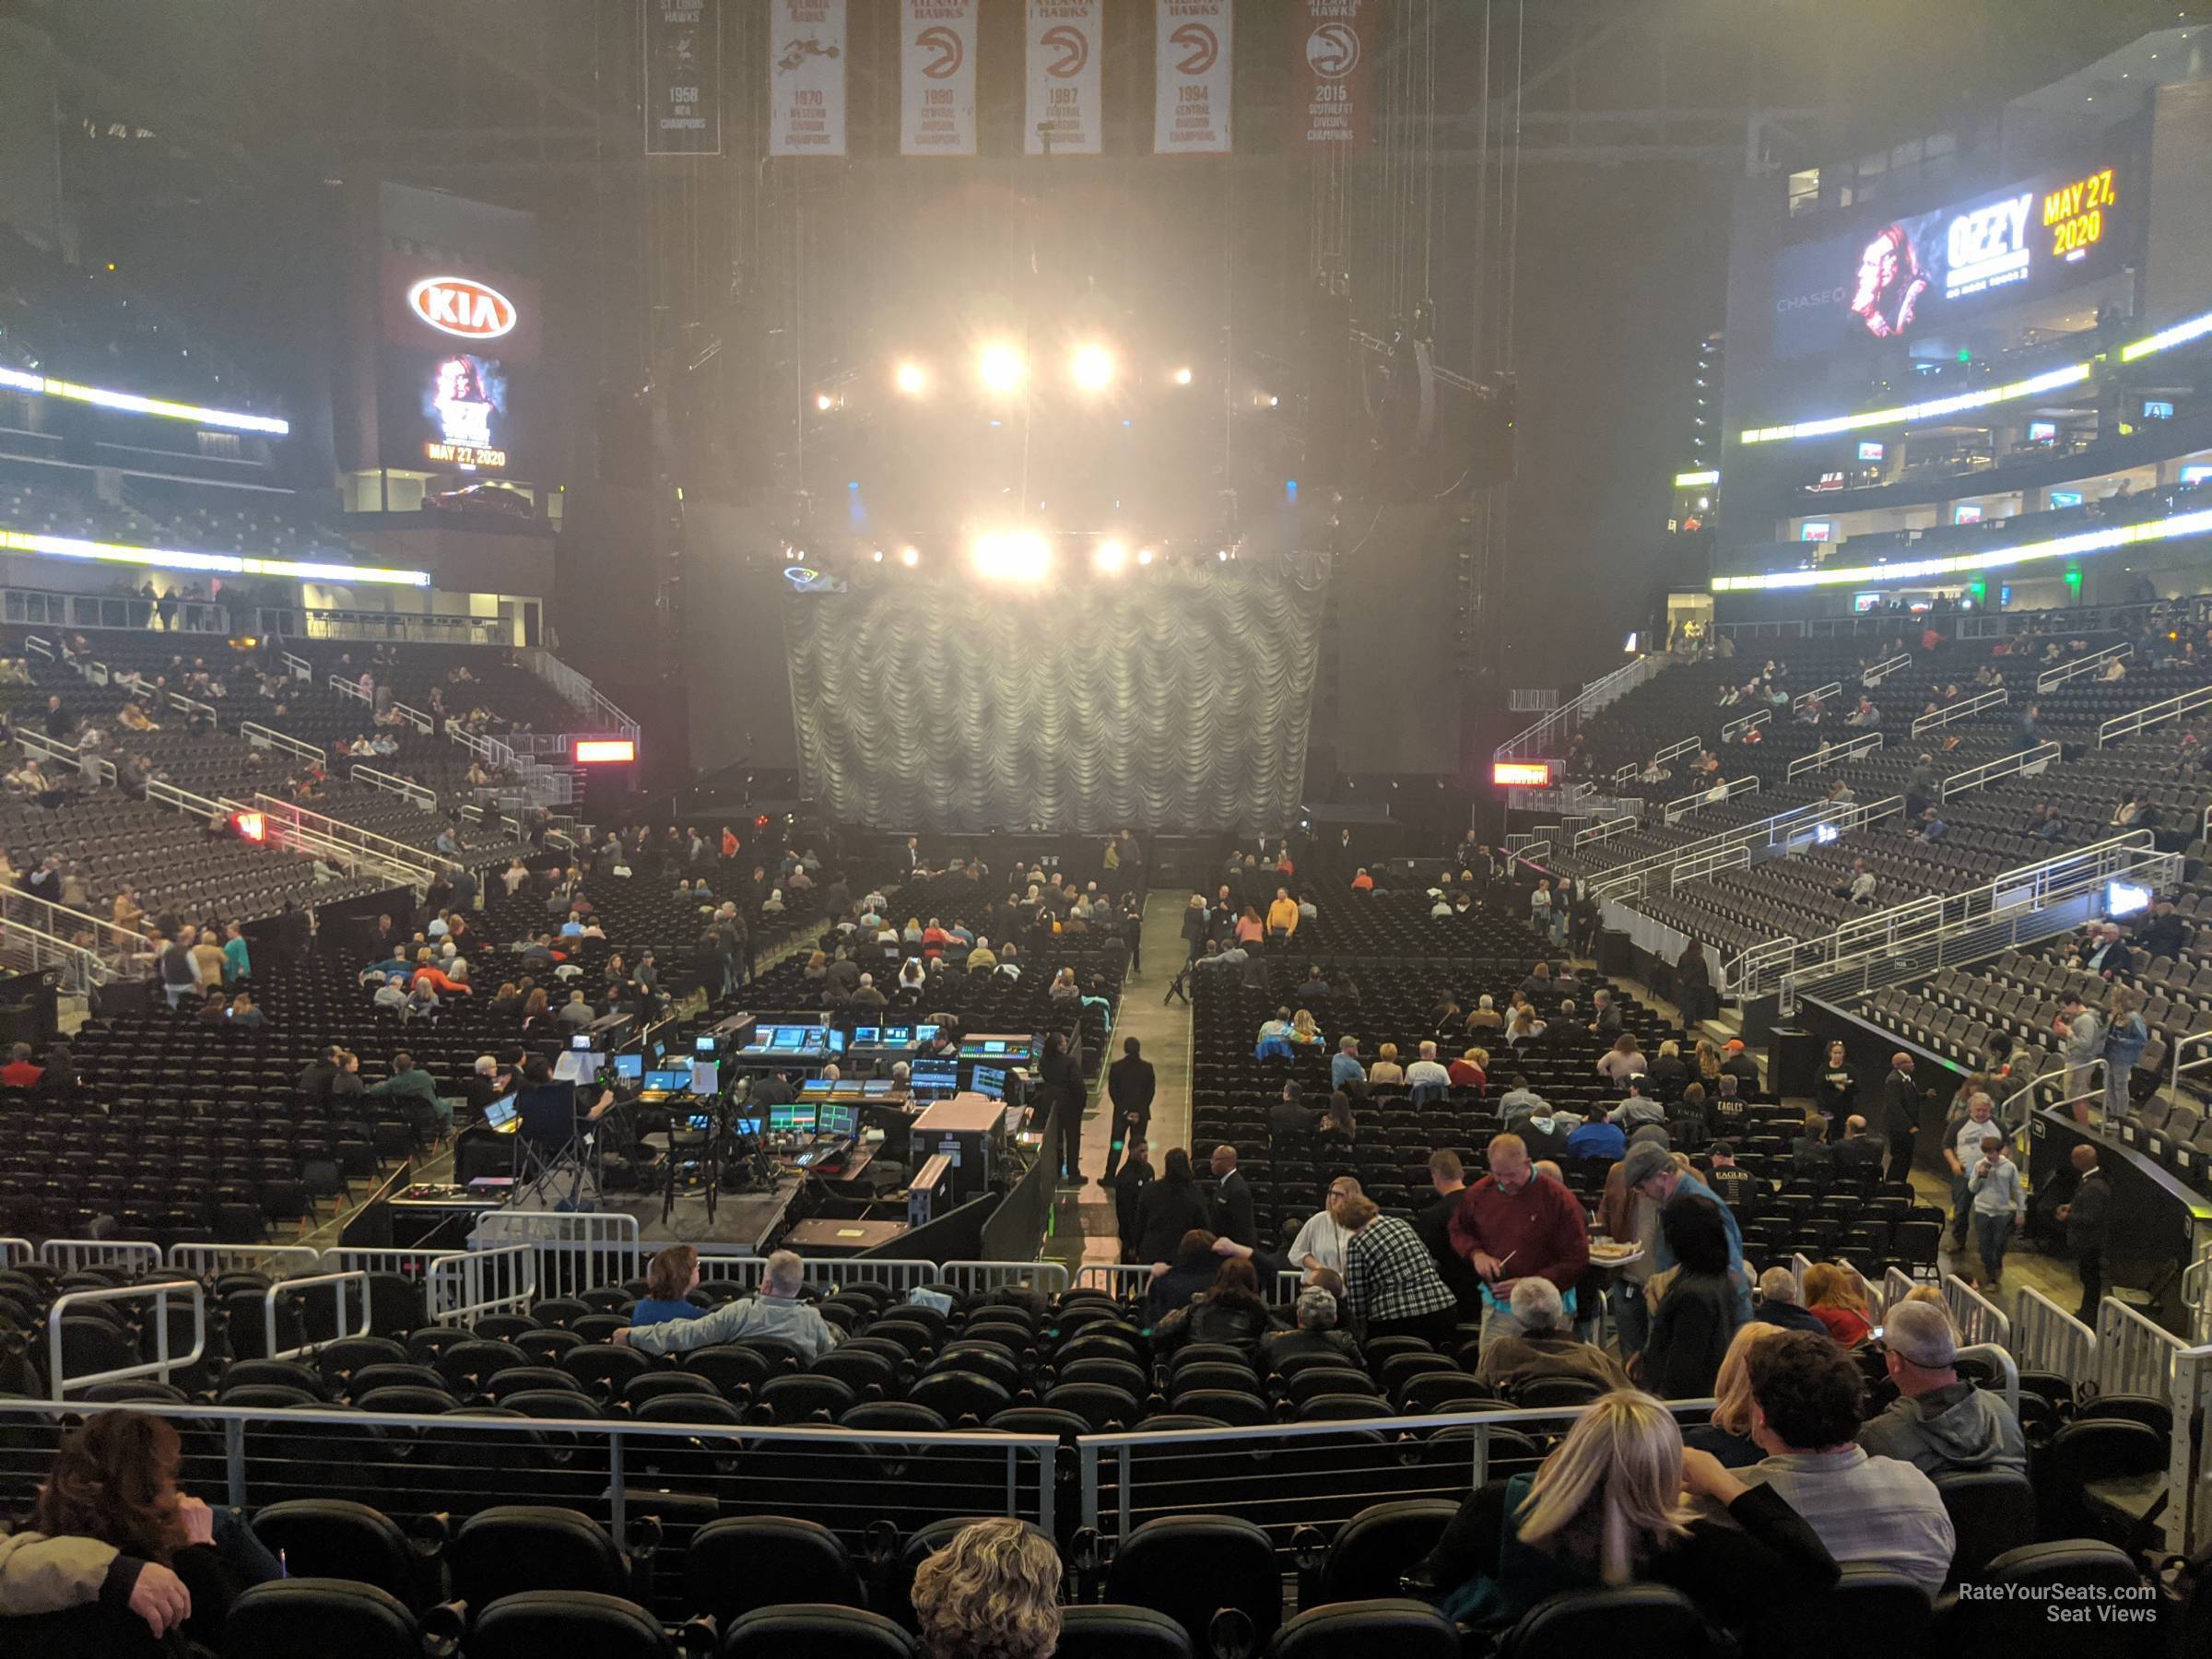 Section 113 at State Farm Arena - RateYourSeats.com